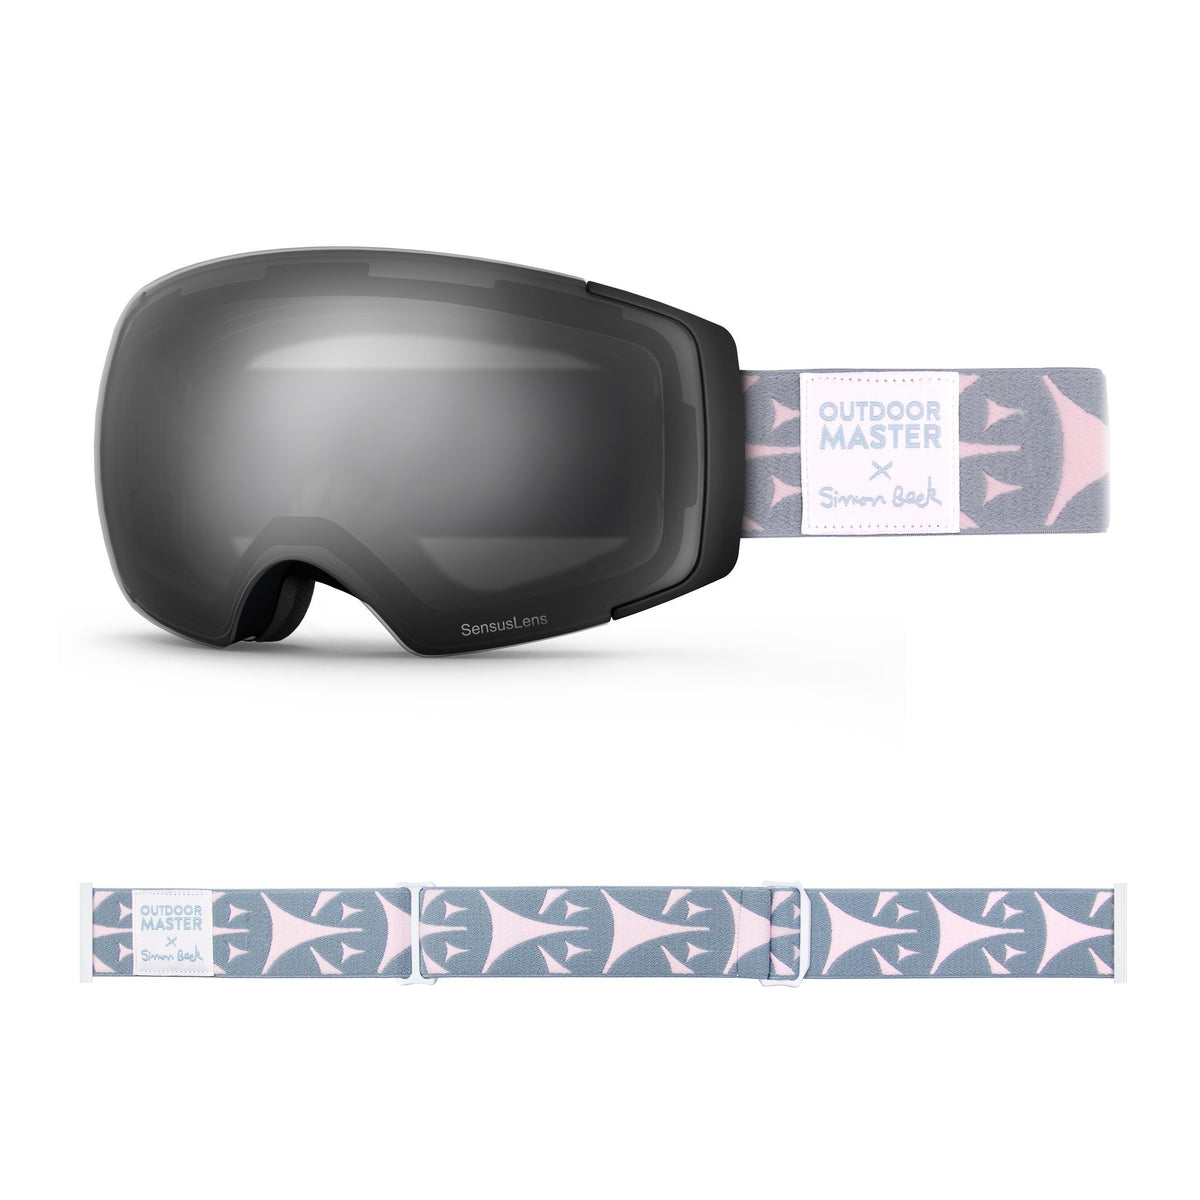 OutdoorMaster x Simon Beck Ski Goggles Pro Series - Snowshoeing Art Limited Edition OutdoorMaster GreenLens VLT 10% TAC Grey With REVO Silver Polarized Bouncy Triangles